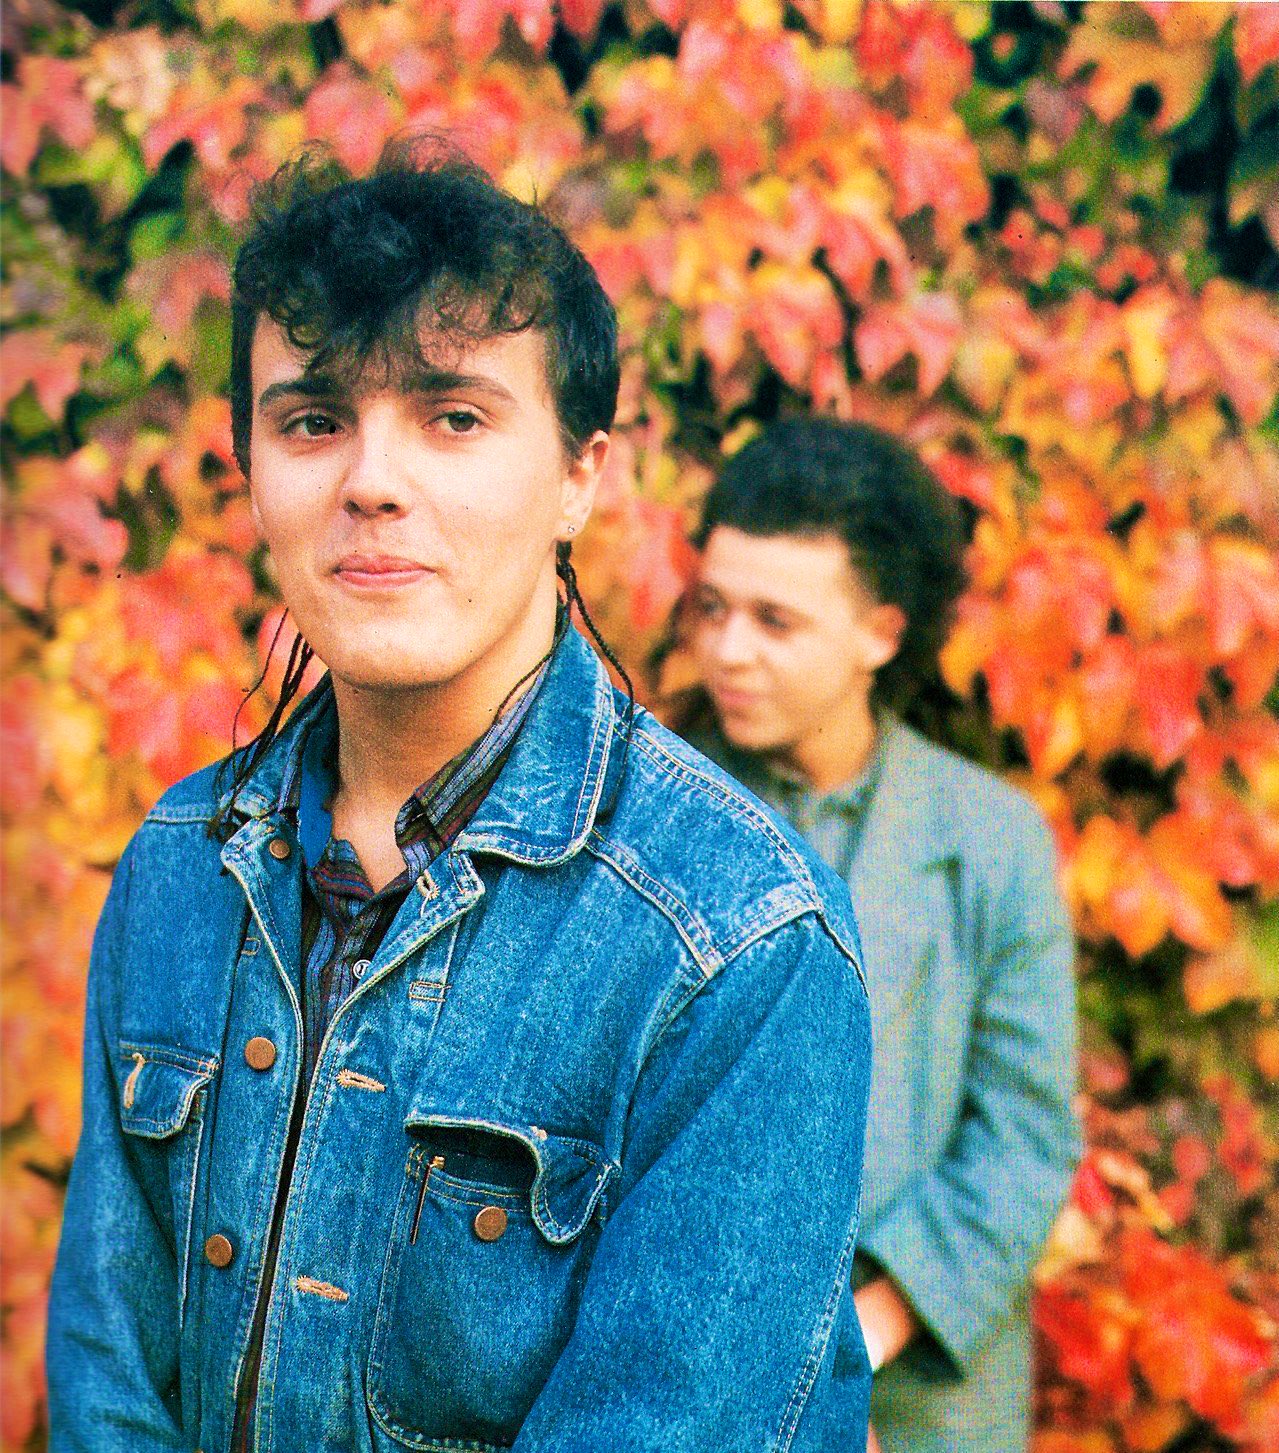 Happy 62nd birthday to Curt Smith. 

What are your favorite Tears For Fears songs? 